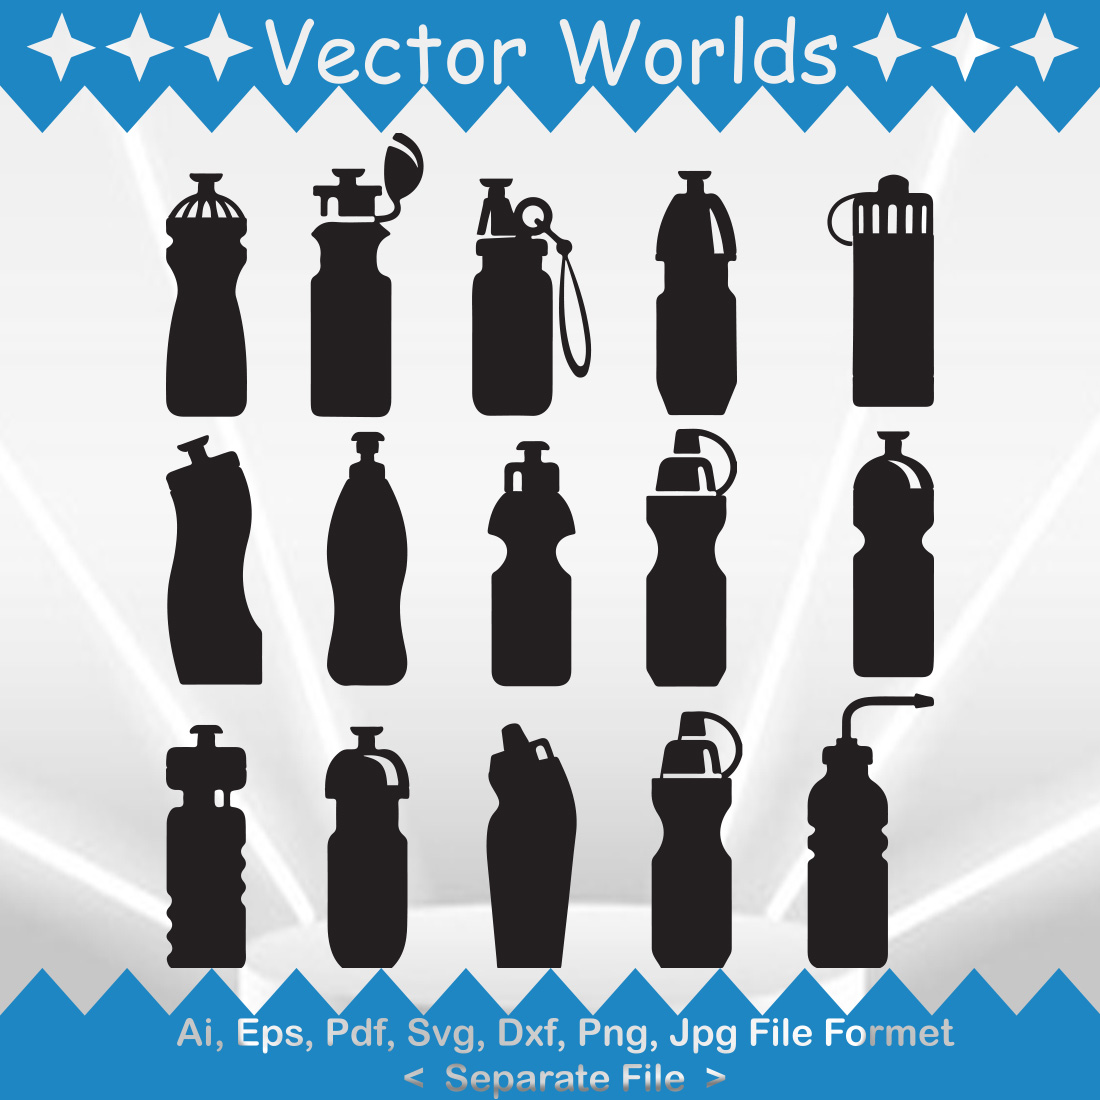 A selection of vector adorable bottle silhouette images.